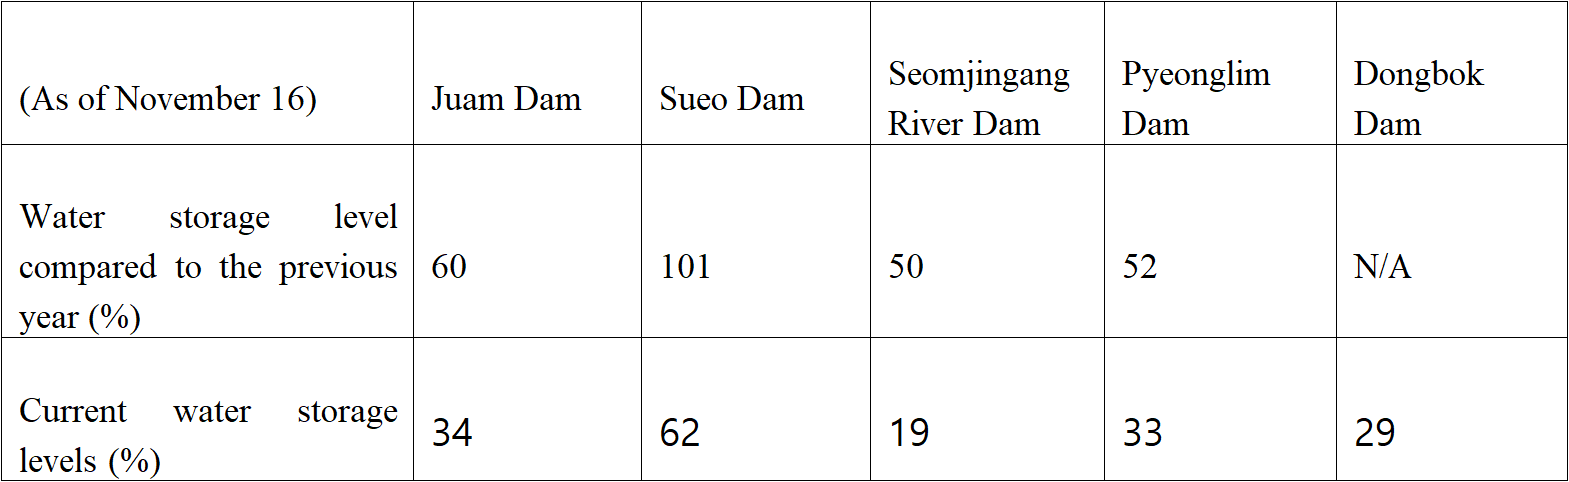 (As of November 16)	Juam Dam	Sueo Dam	Seomjingang River Dam	Pyeonglim Dam	Dongbok Dam  Water storage level compared to the previous year (%)	60	101	50	52	N/A  Current water storage levels (%)	34	62	19	33	29